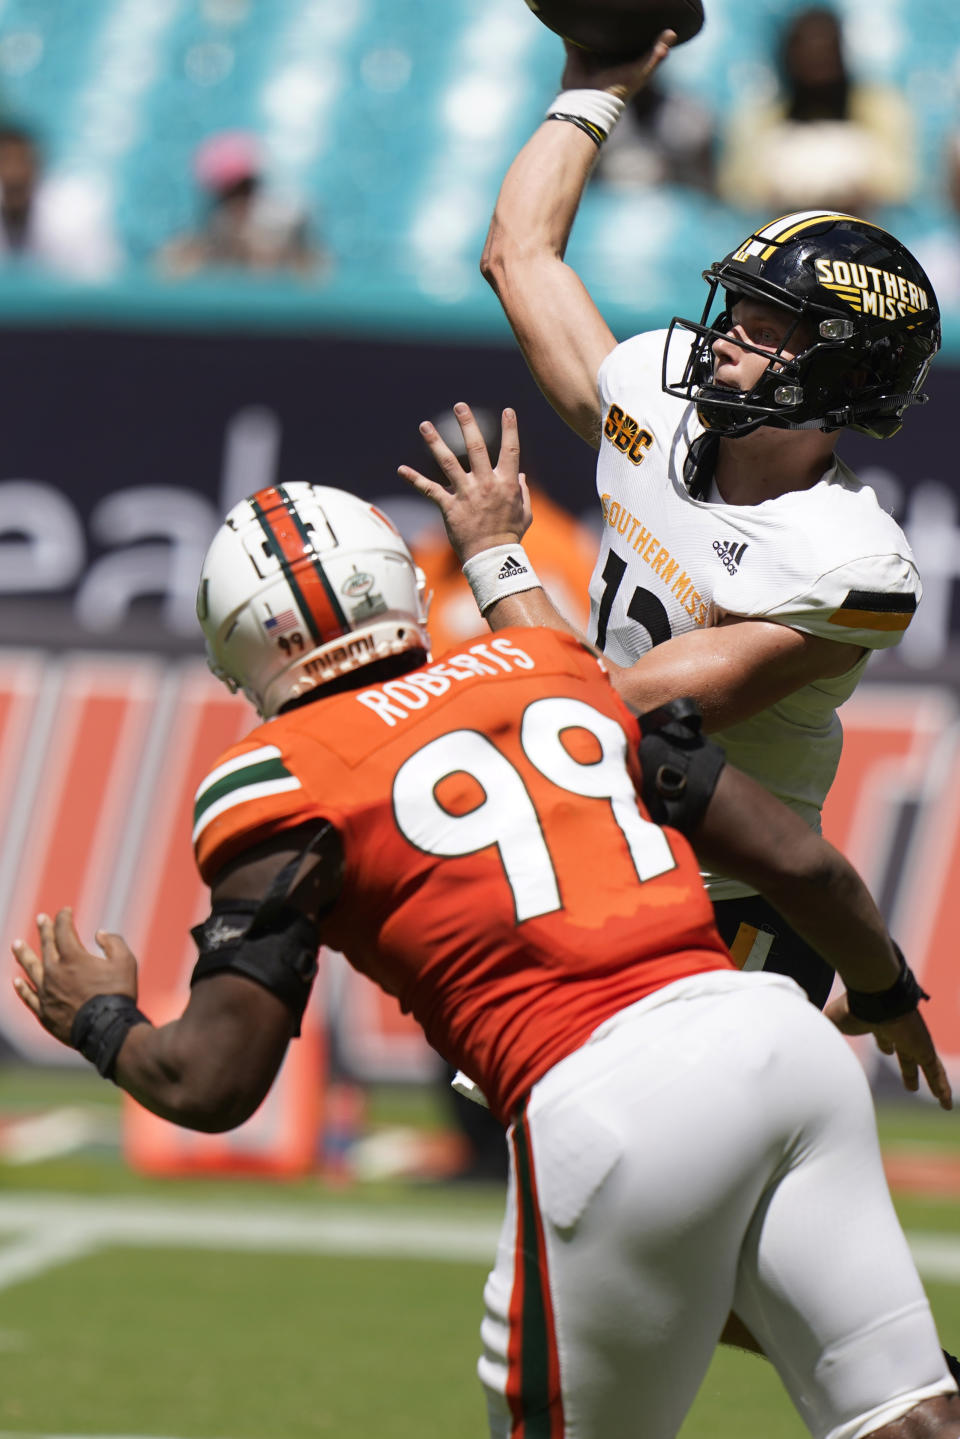 Miami defensive lineman Elijah Roberts (99) rushes Southern Miss quarterback Zach Wilcke during the second half of an NCAA college football game, Saturday, Sept. 10, 2022, in Miami Gardens, Fla. (AP Photo/Wilfredo Lee)